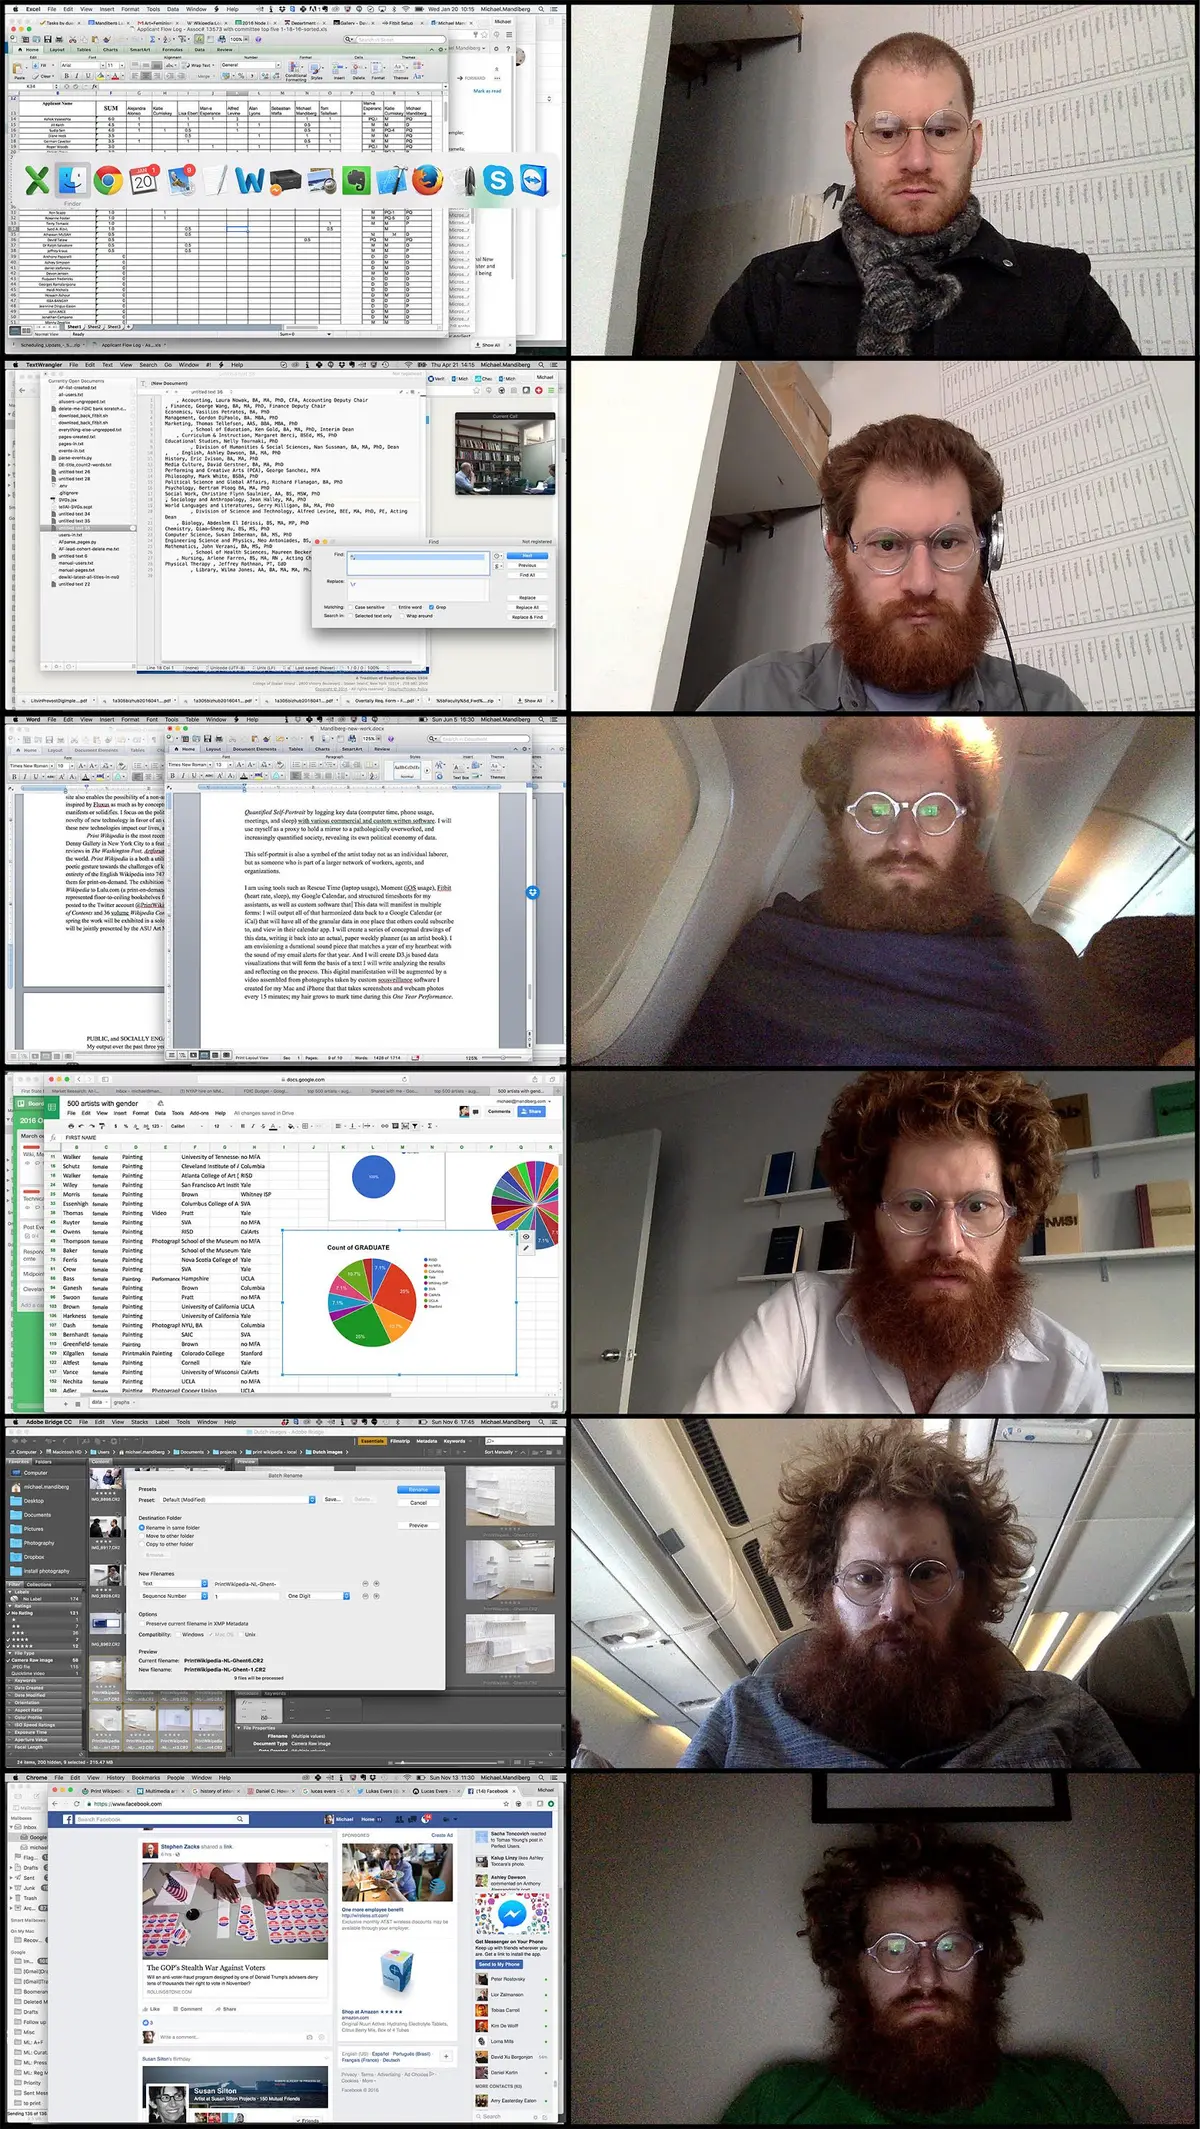 A two-column, six-row image; one column showcases evolving work screenshots, the other tracks a person's hair and beard growth.